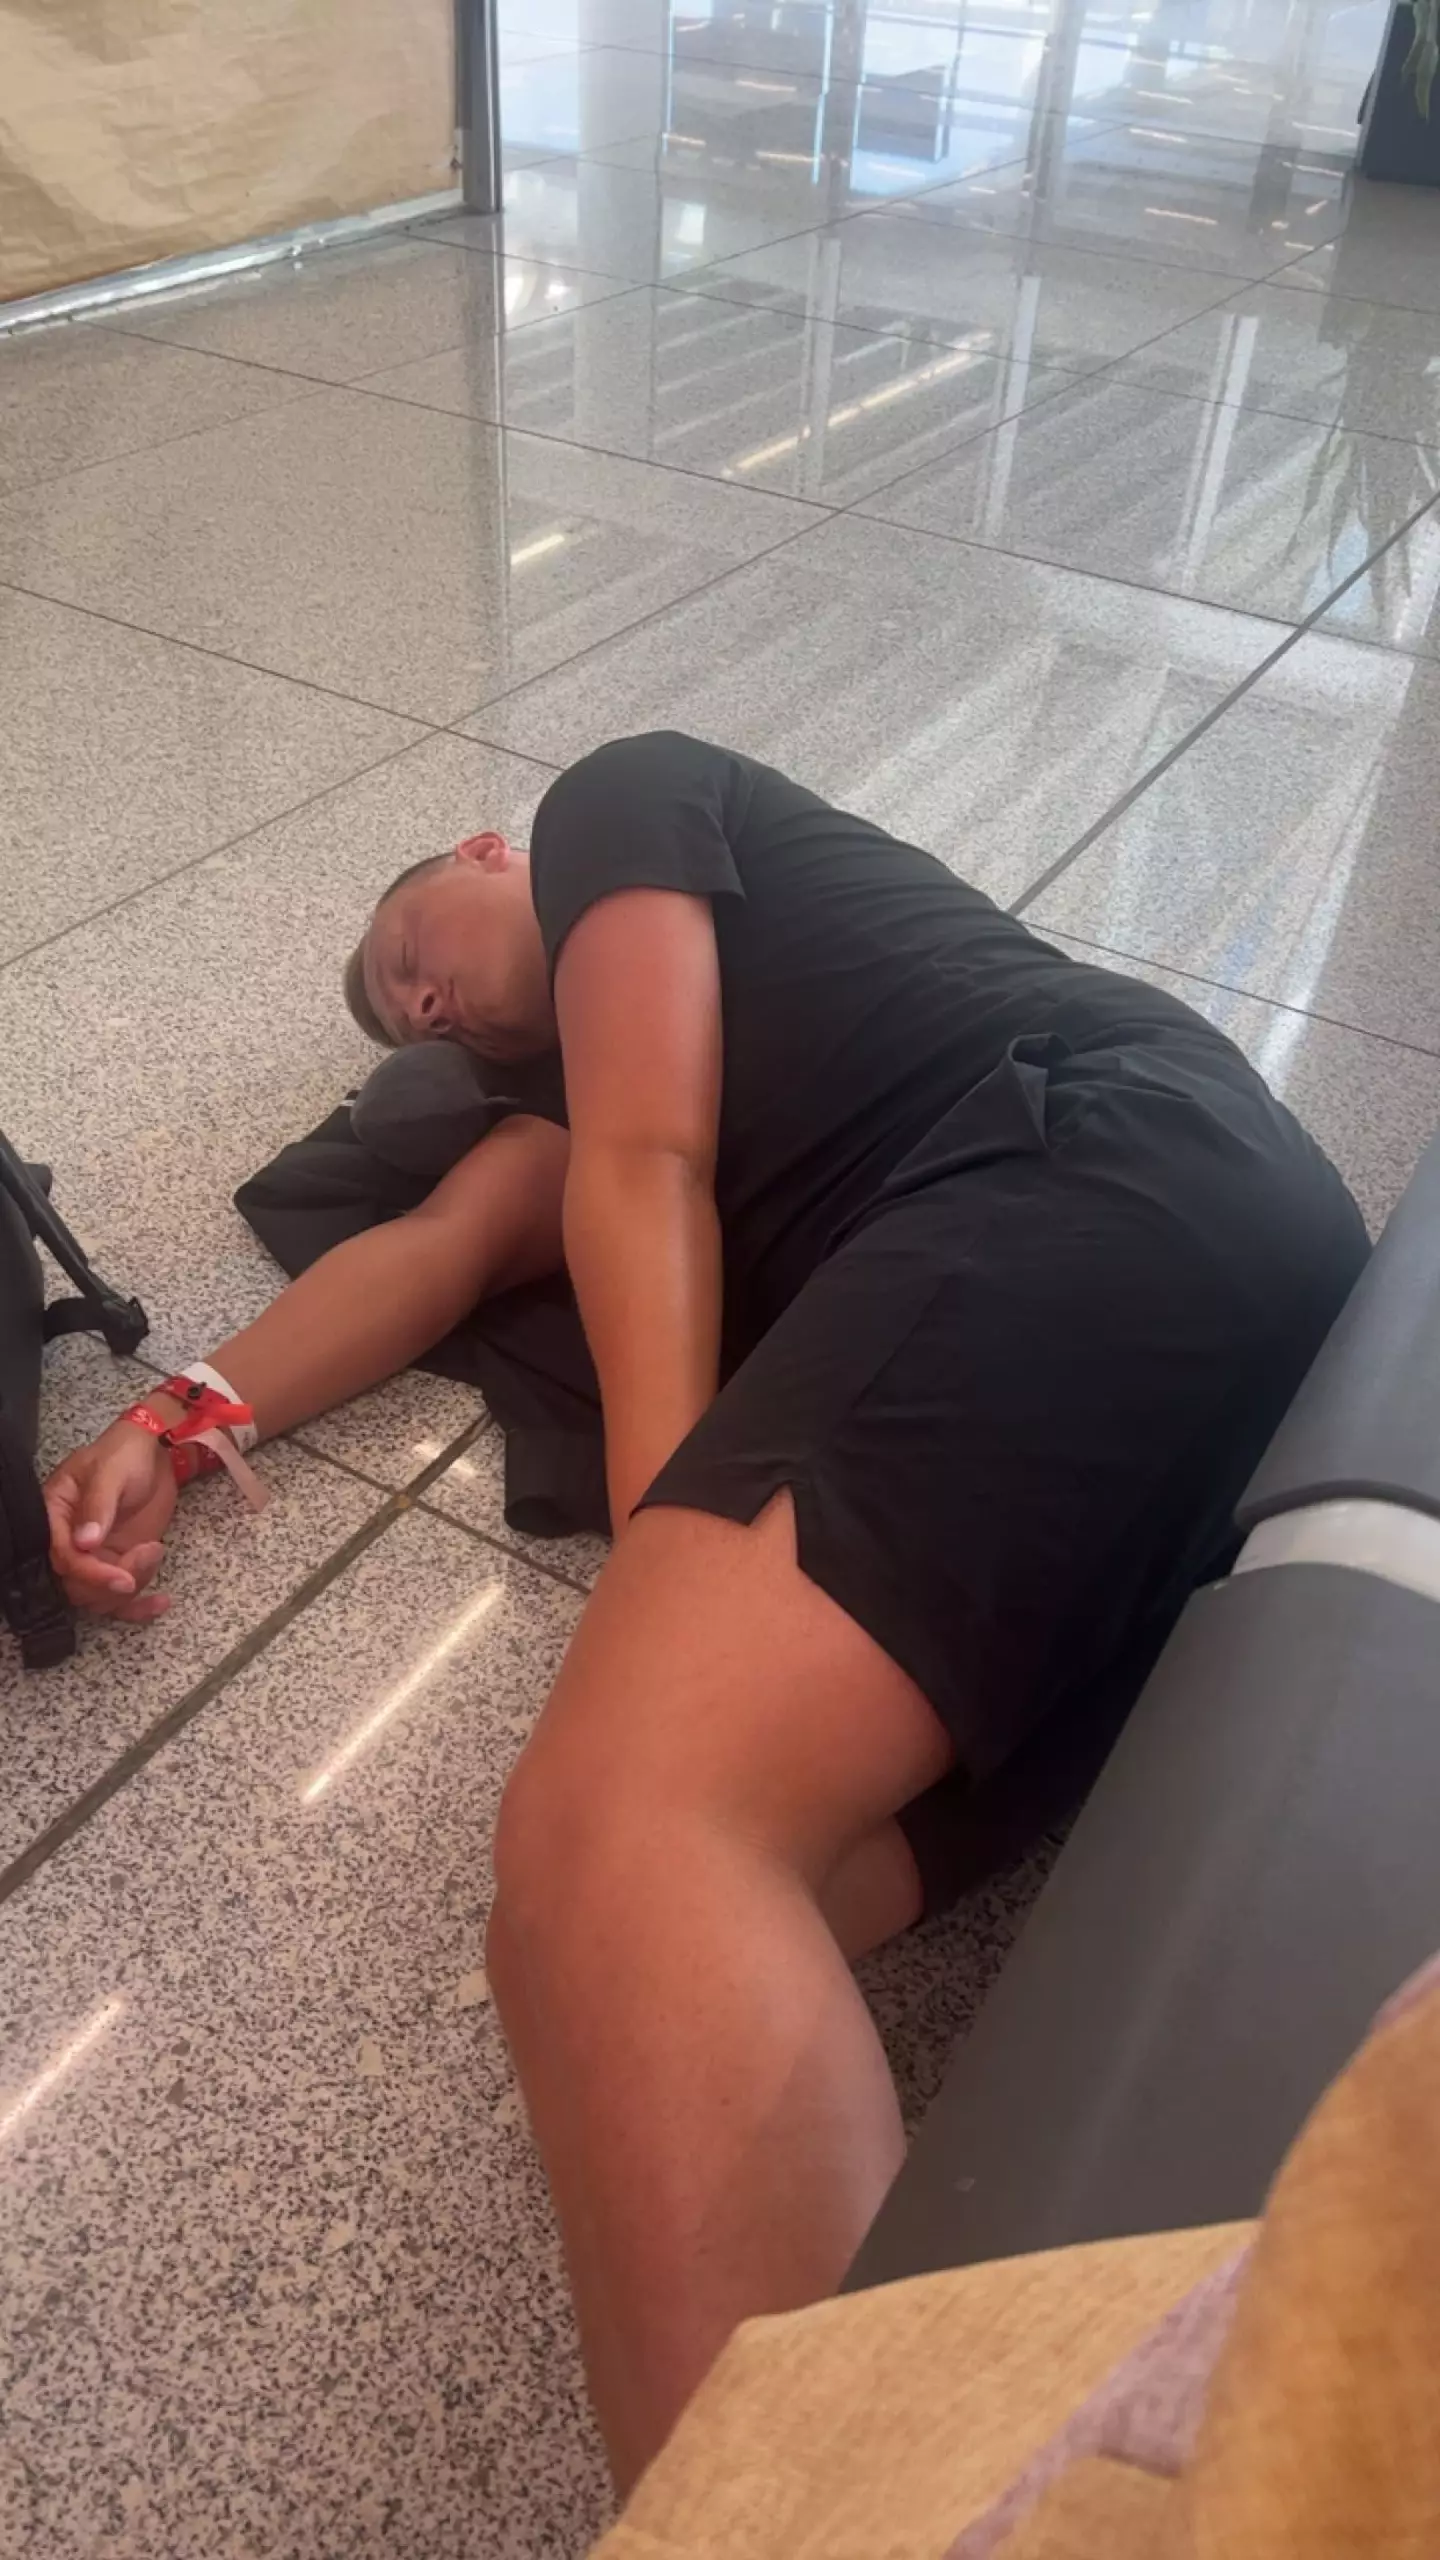 The couple ended up sleeping 'on the floor in the airport'.